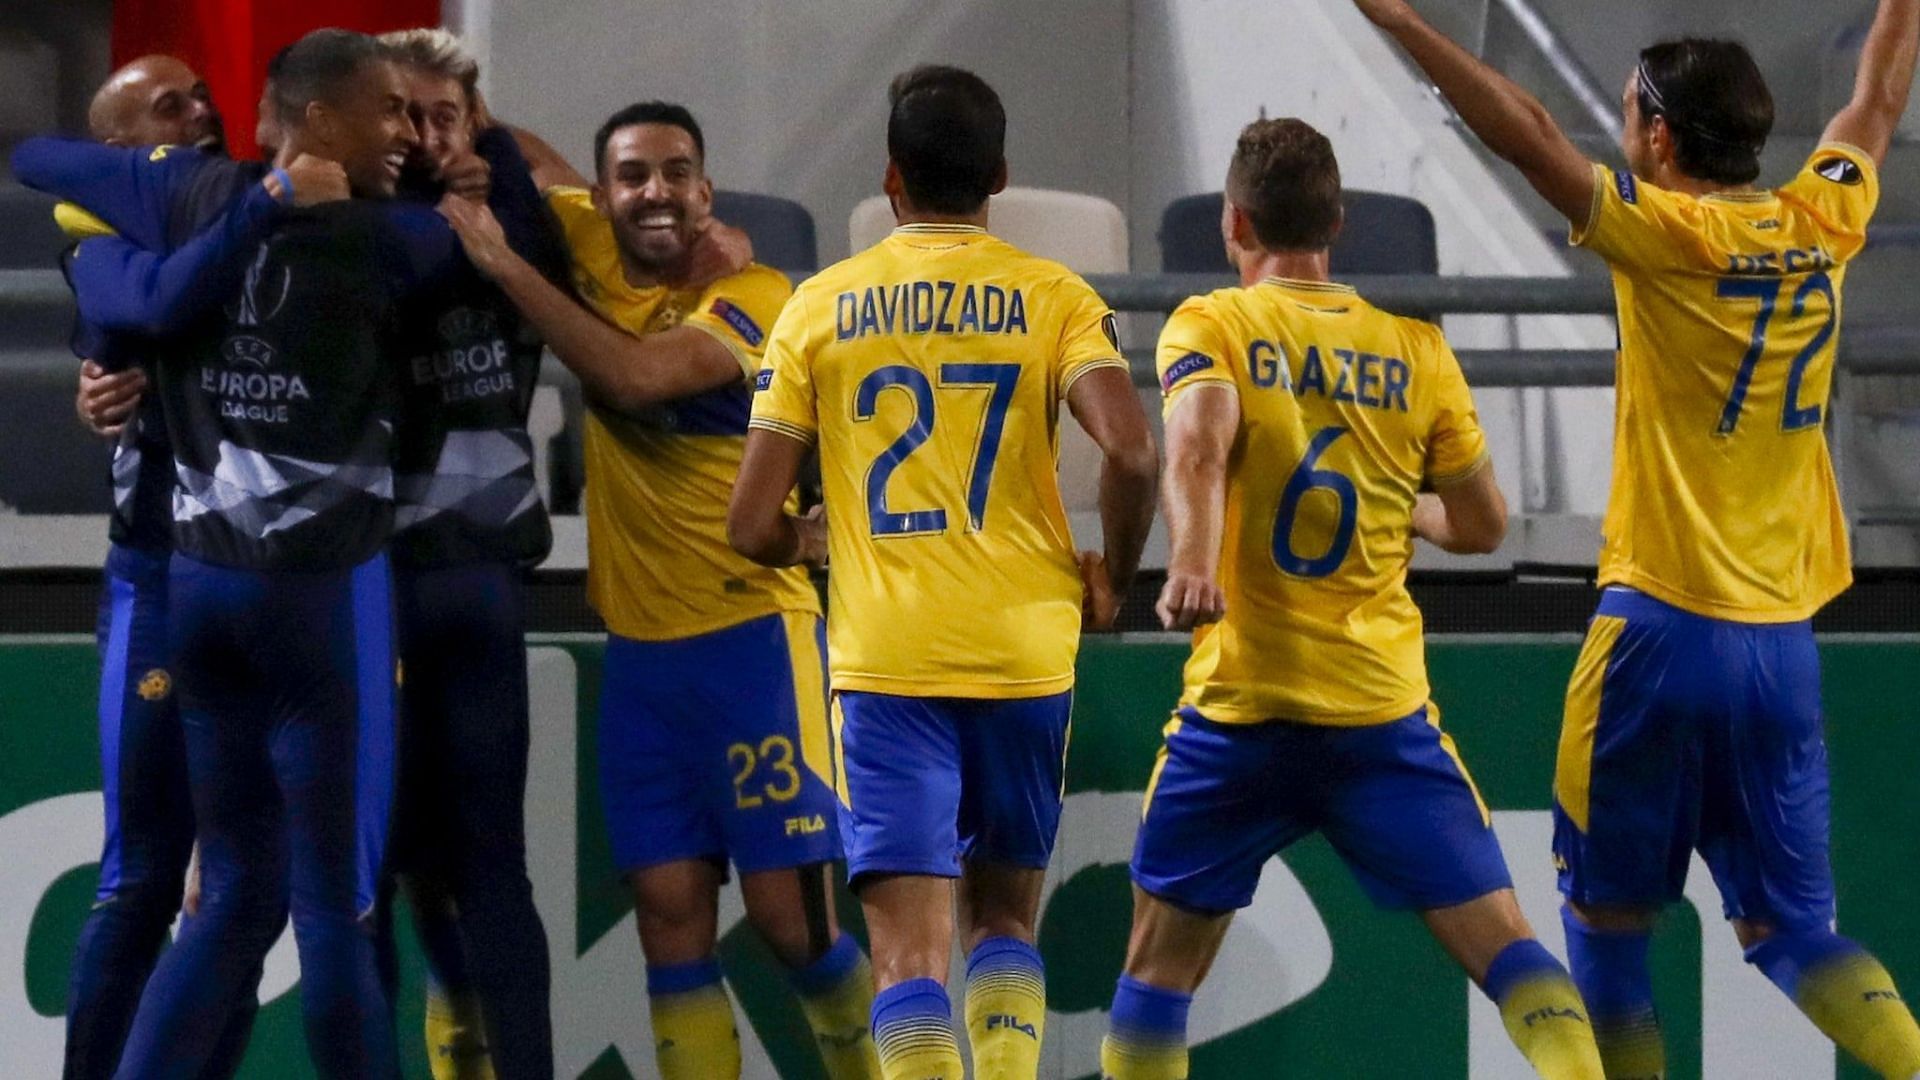 Maccabi Tel Aviv face Zira in their Conference League qualifying fixture on Thursday